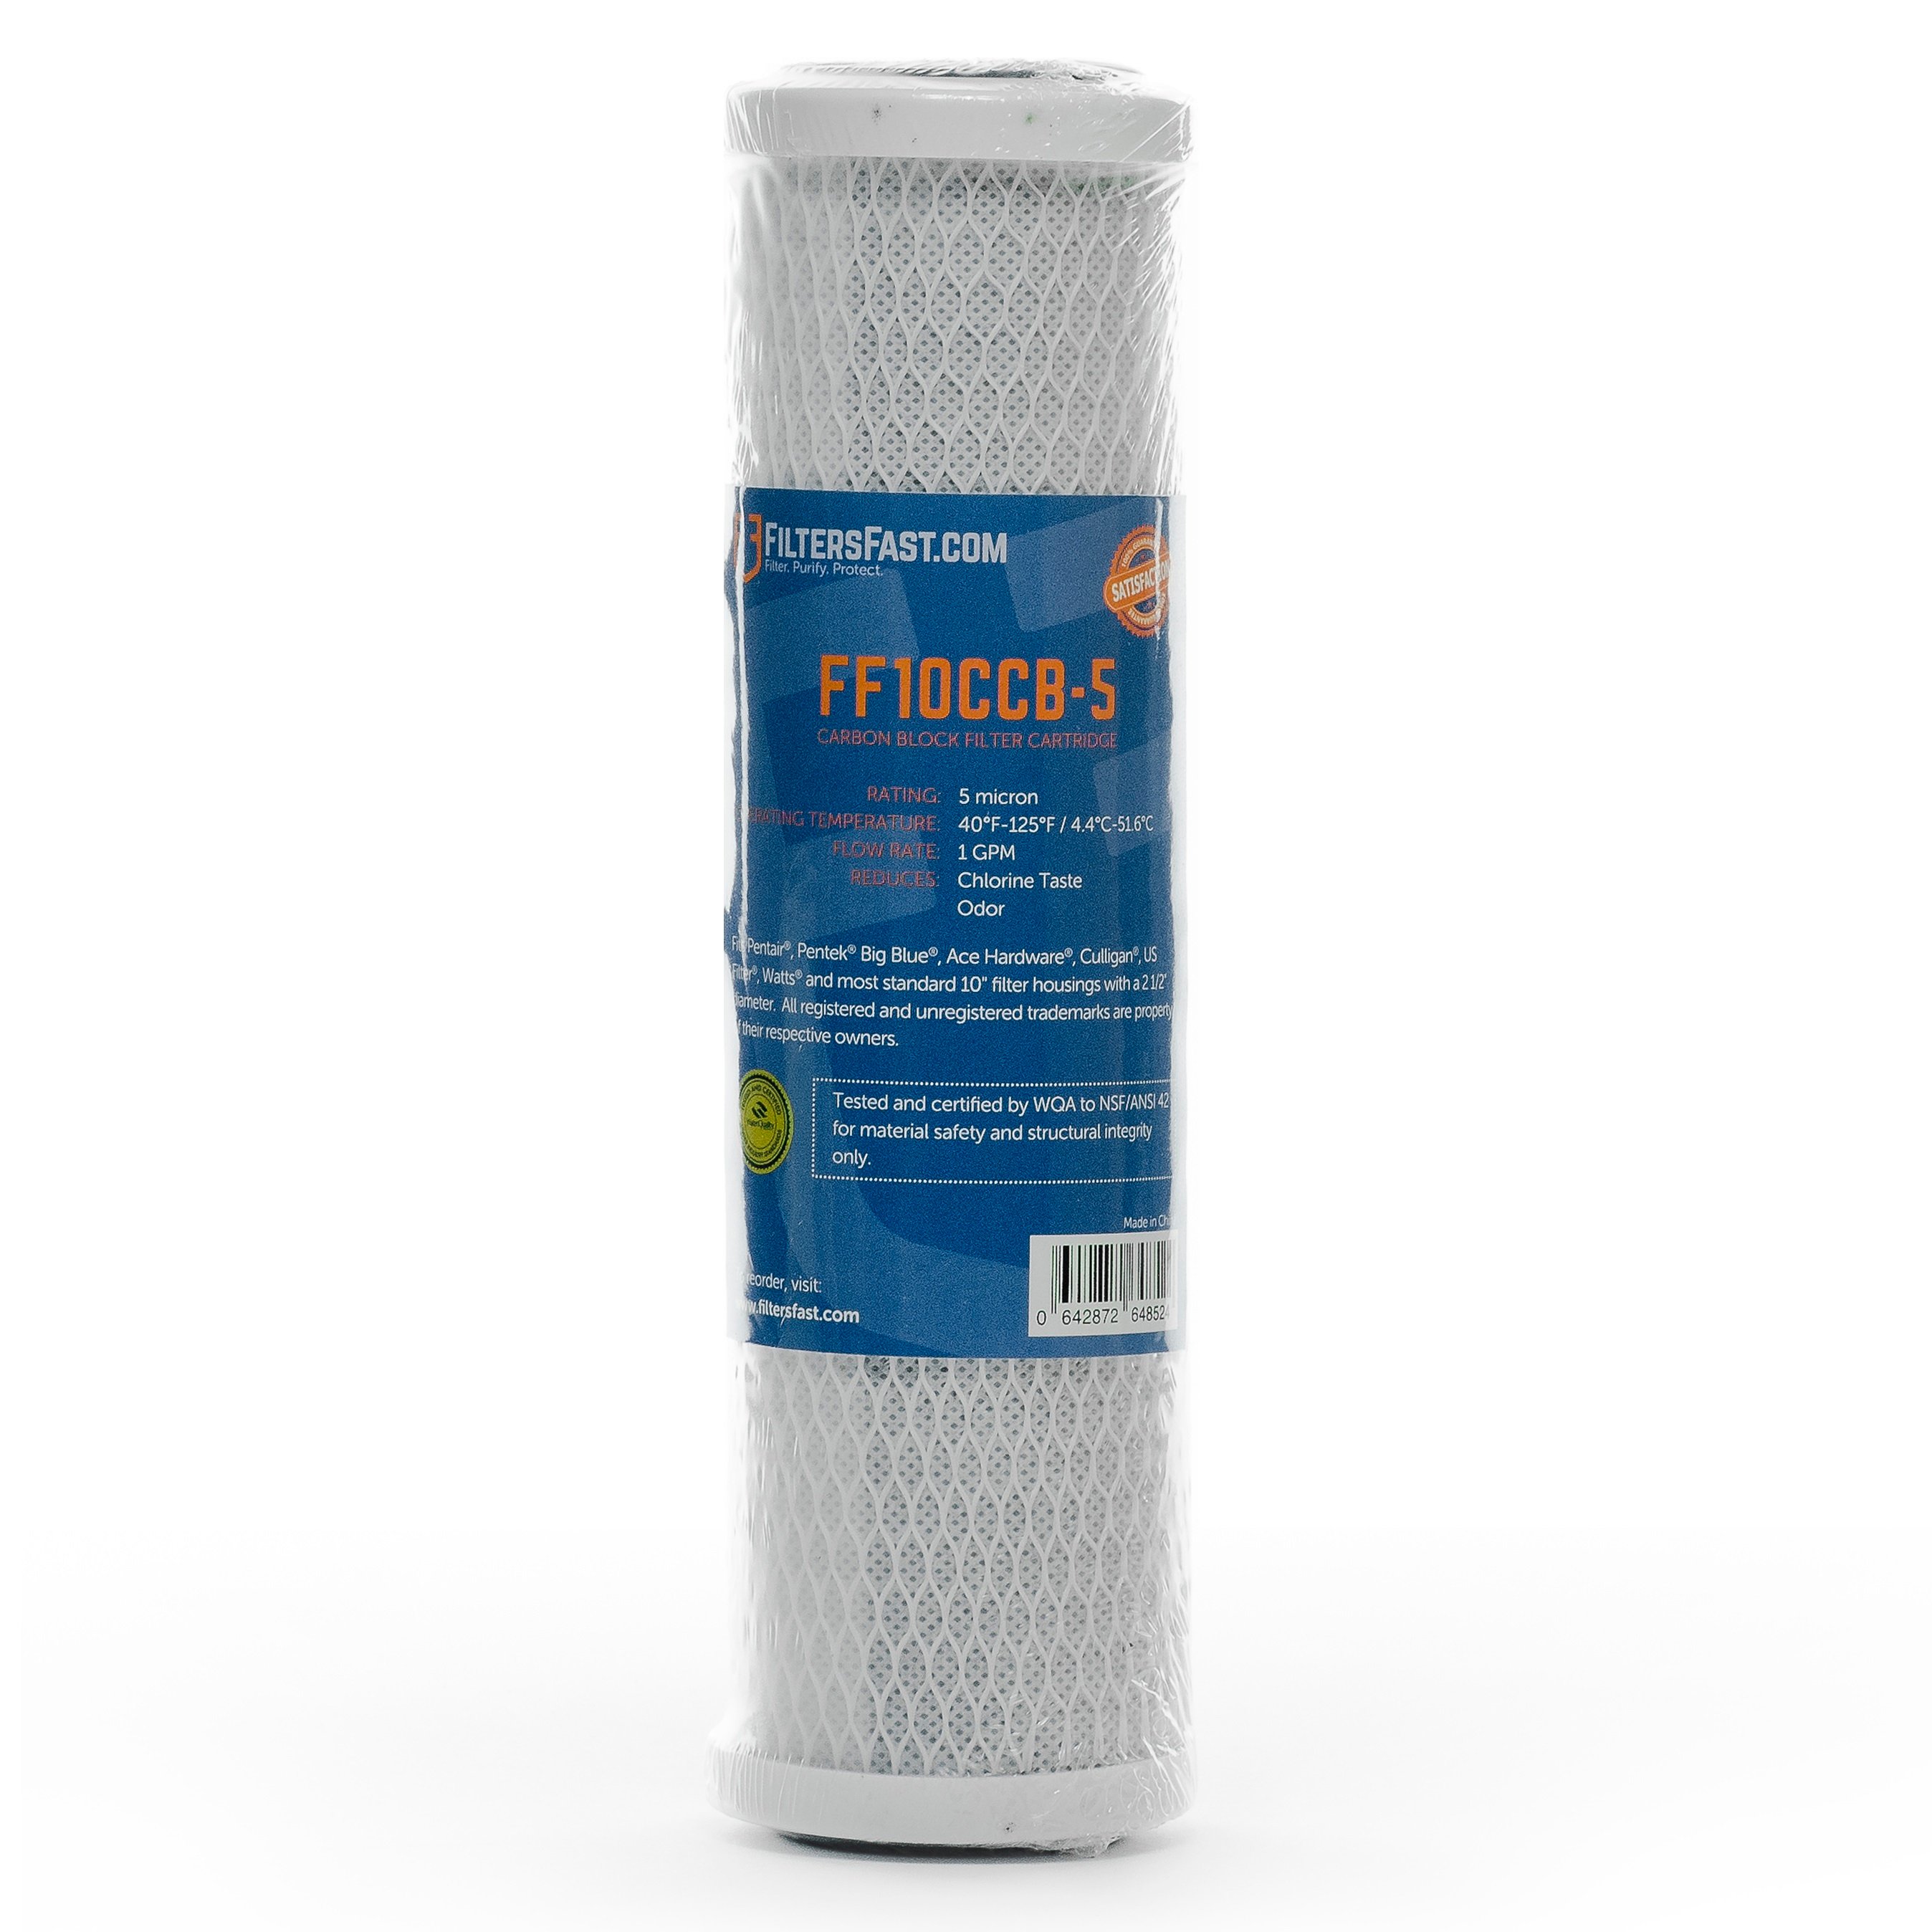 Filters Fast&reg; FF10CCB-5 Replacement for DuPont WFPFC9001 Carbon Block Filter Cartridge